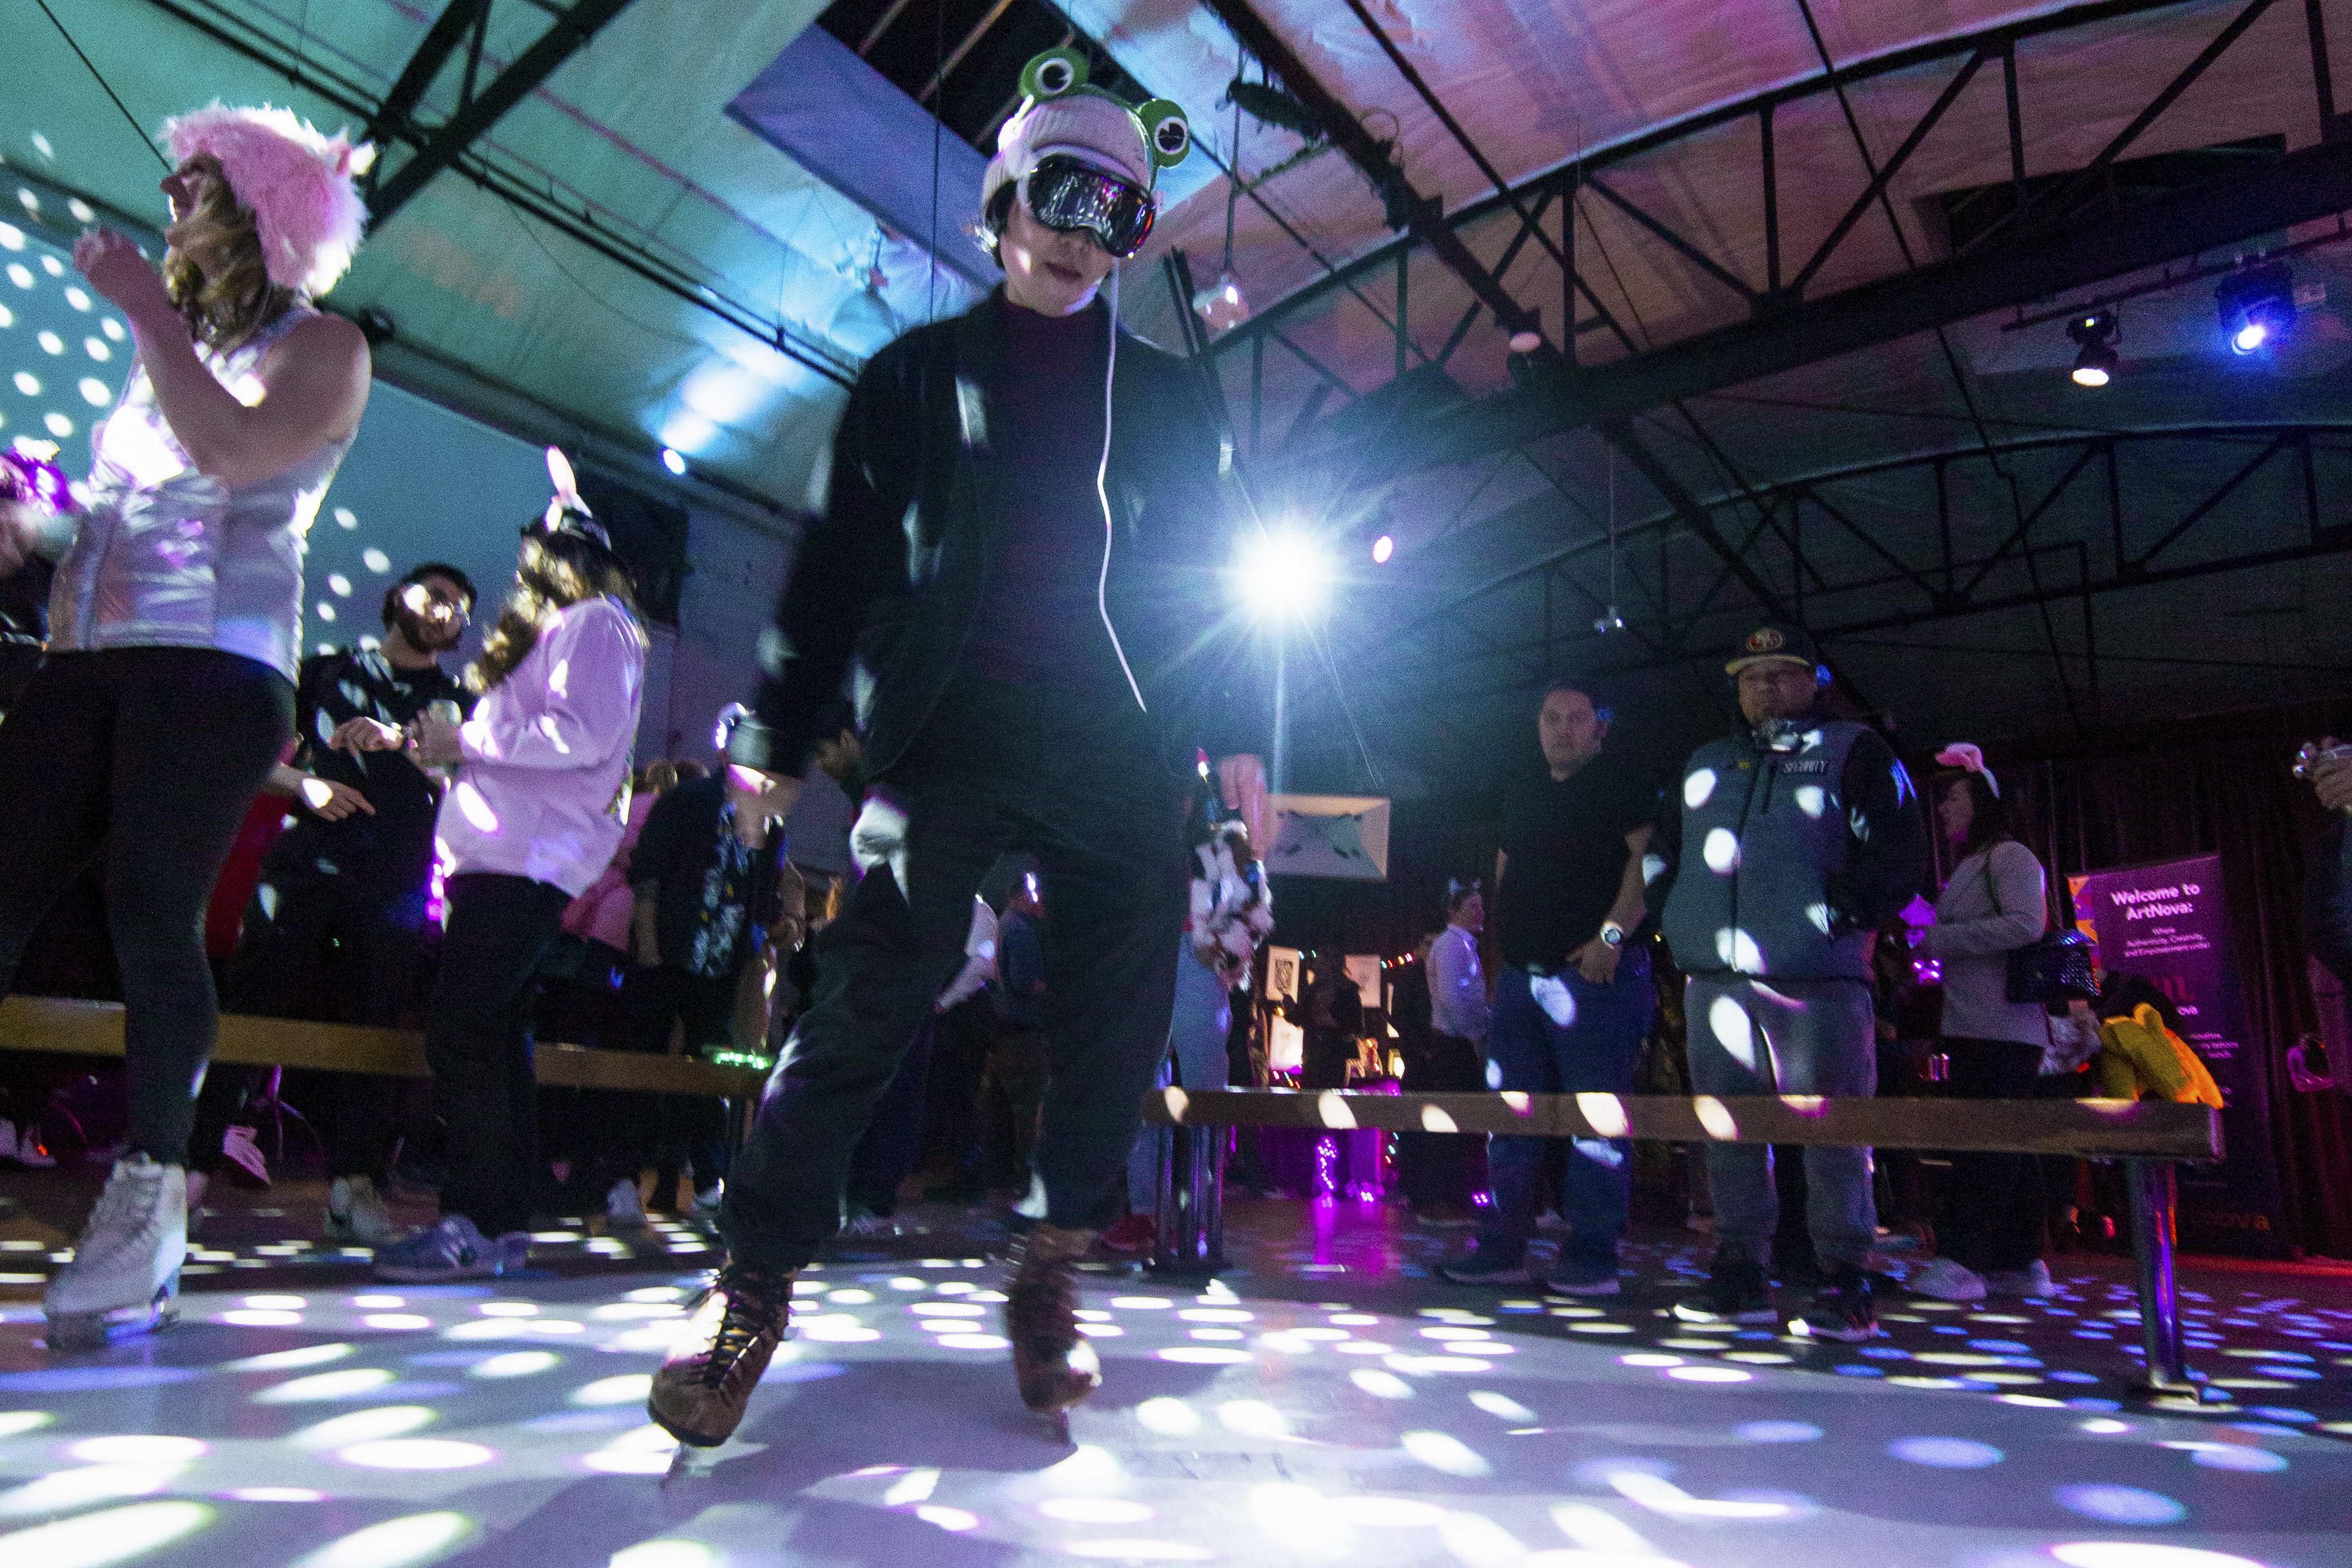 People skate in a dimly lit venue with colorful lights and disco vibes.